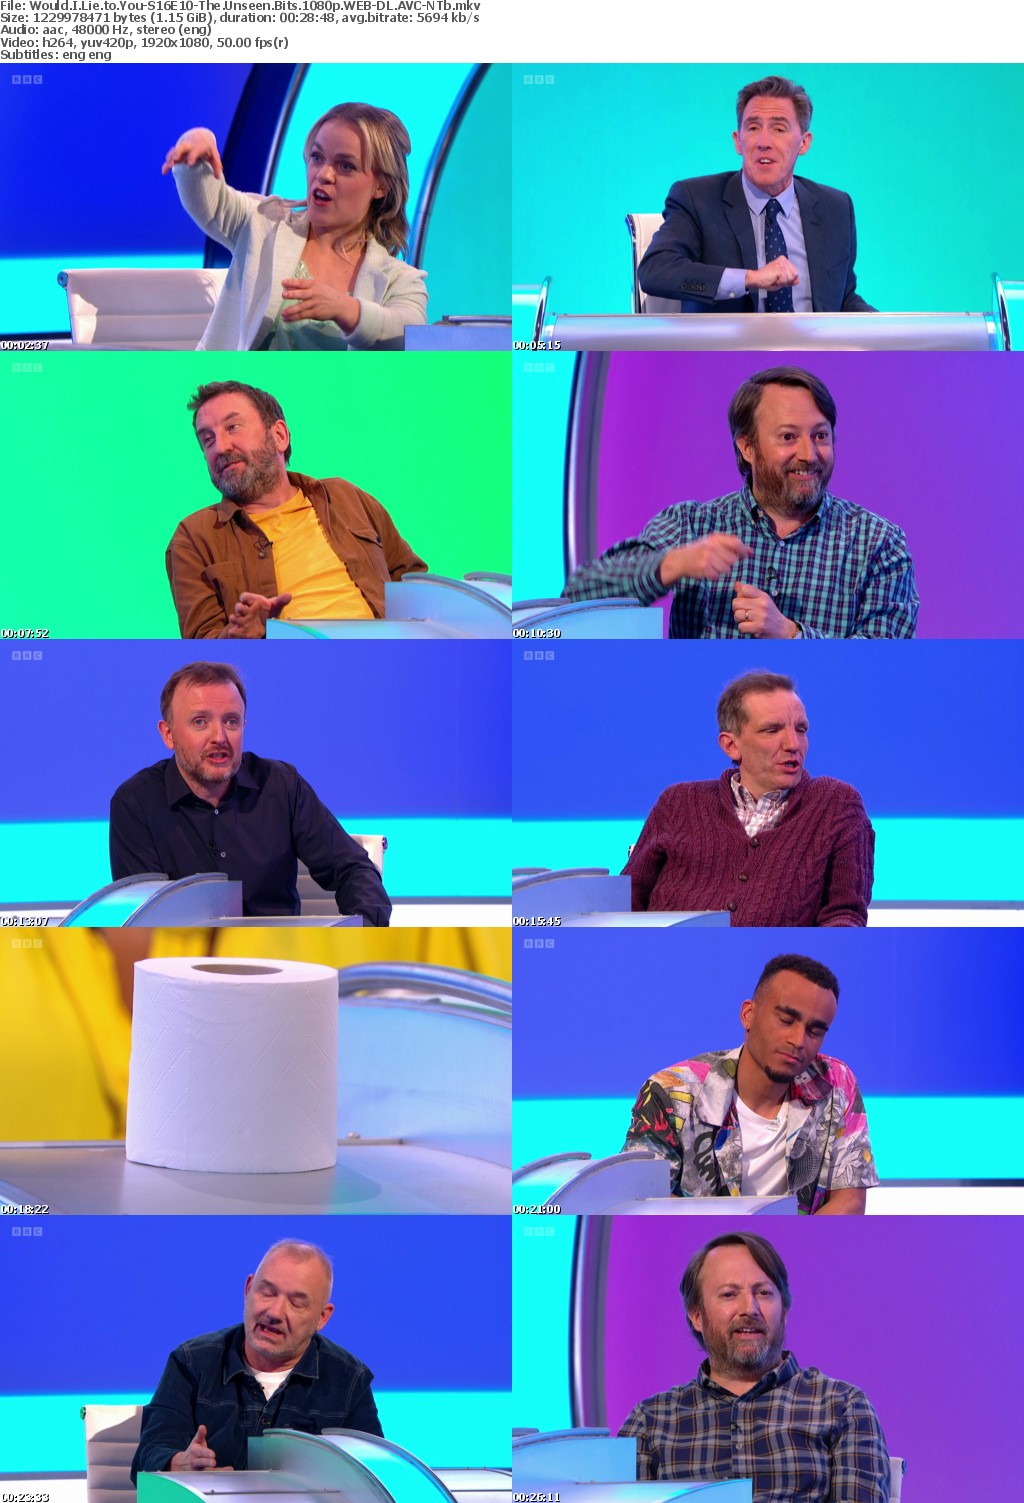 Would I Lie to You-S16E10-The Unseen Bits 1080p WEB-DL AVC-NTb